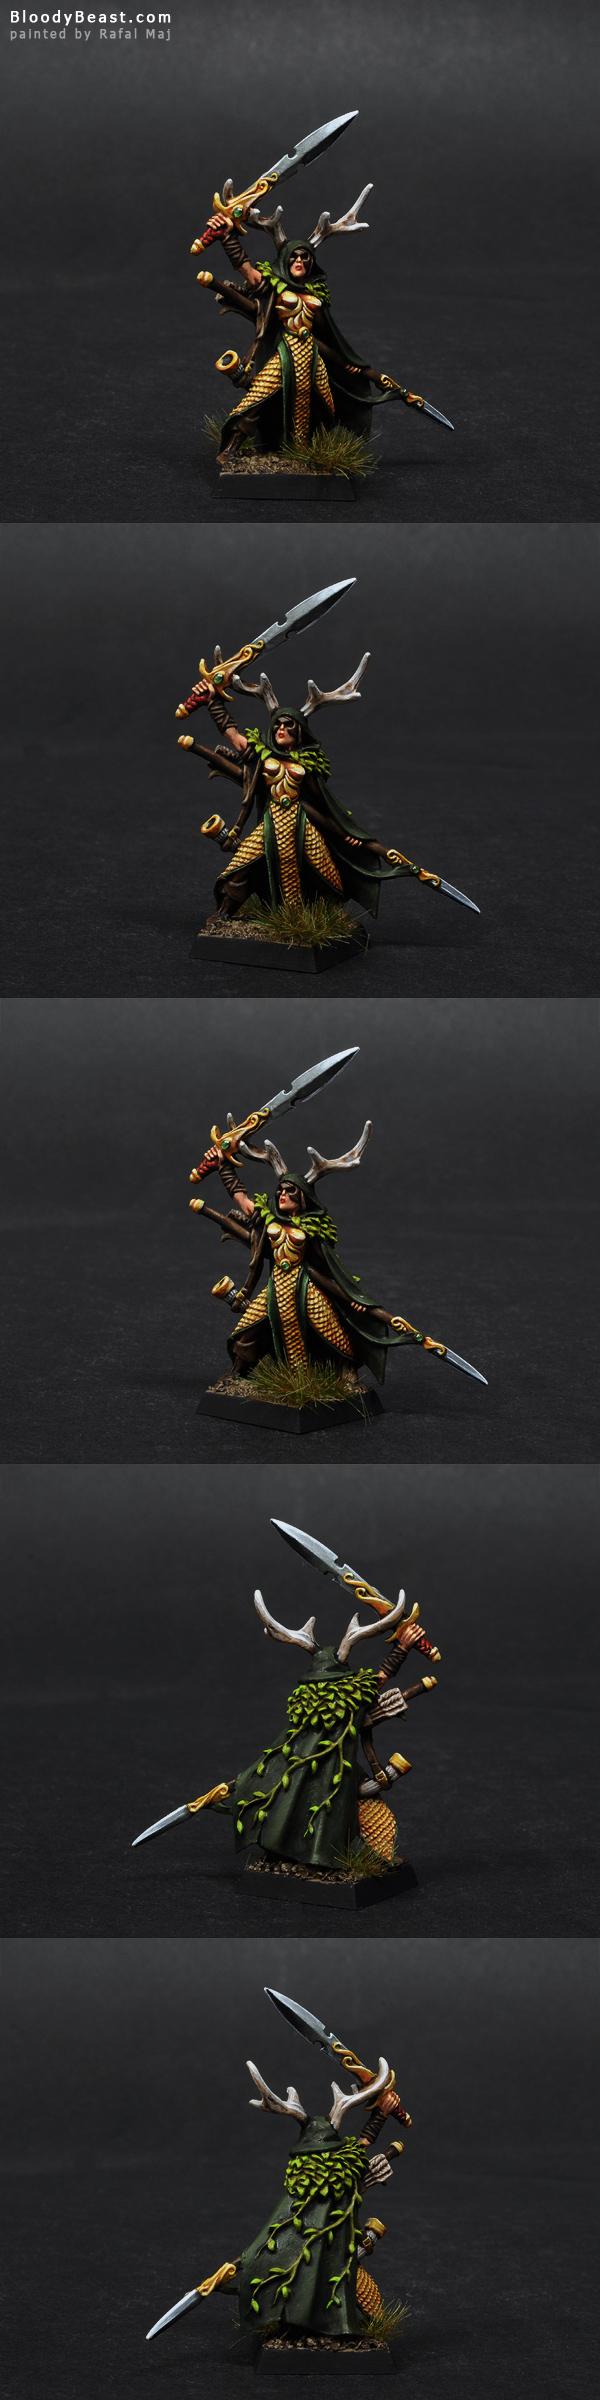 Wood Elf Lord with Sword and Spear painted by Rafal Maj (BloodyBeast.com)